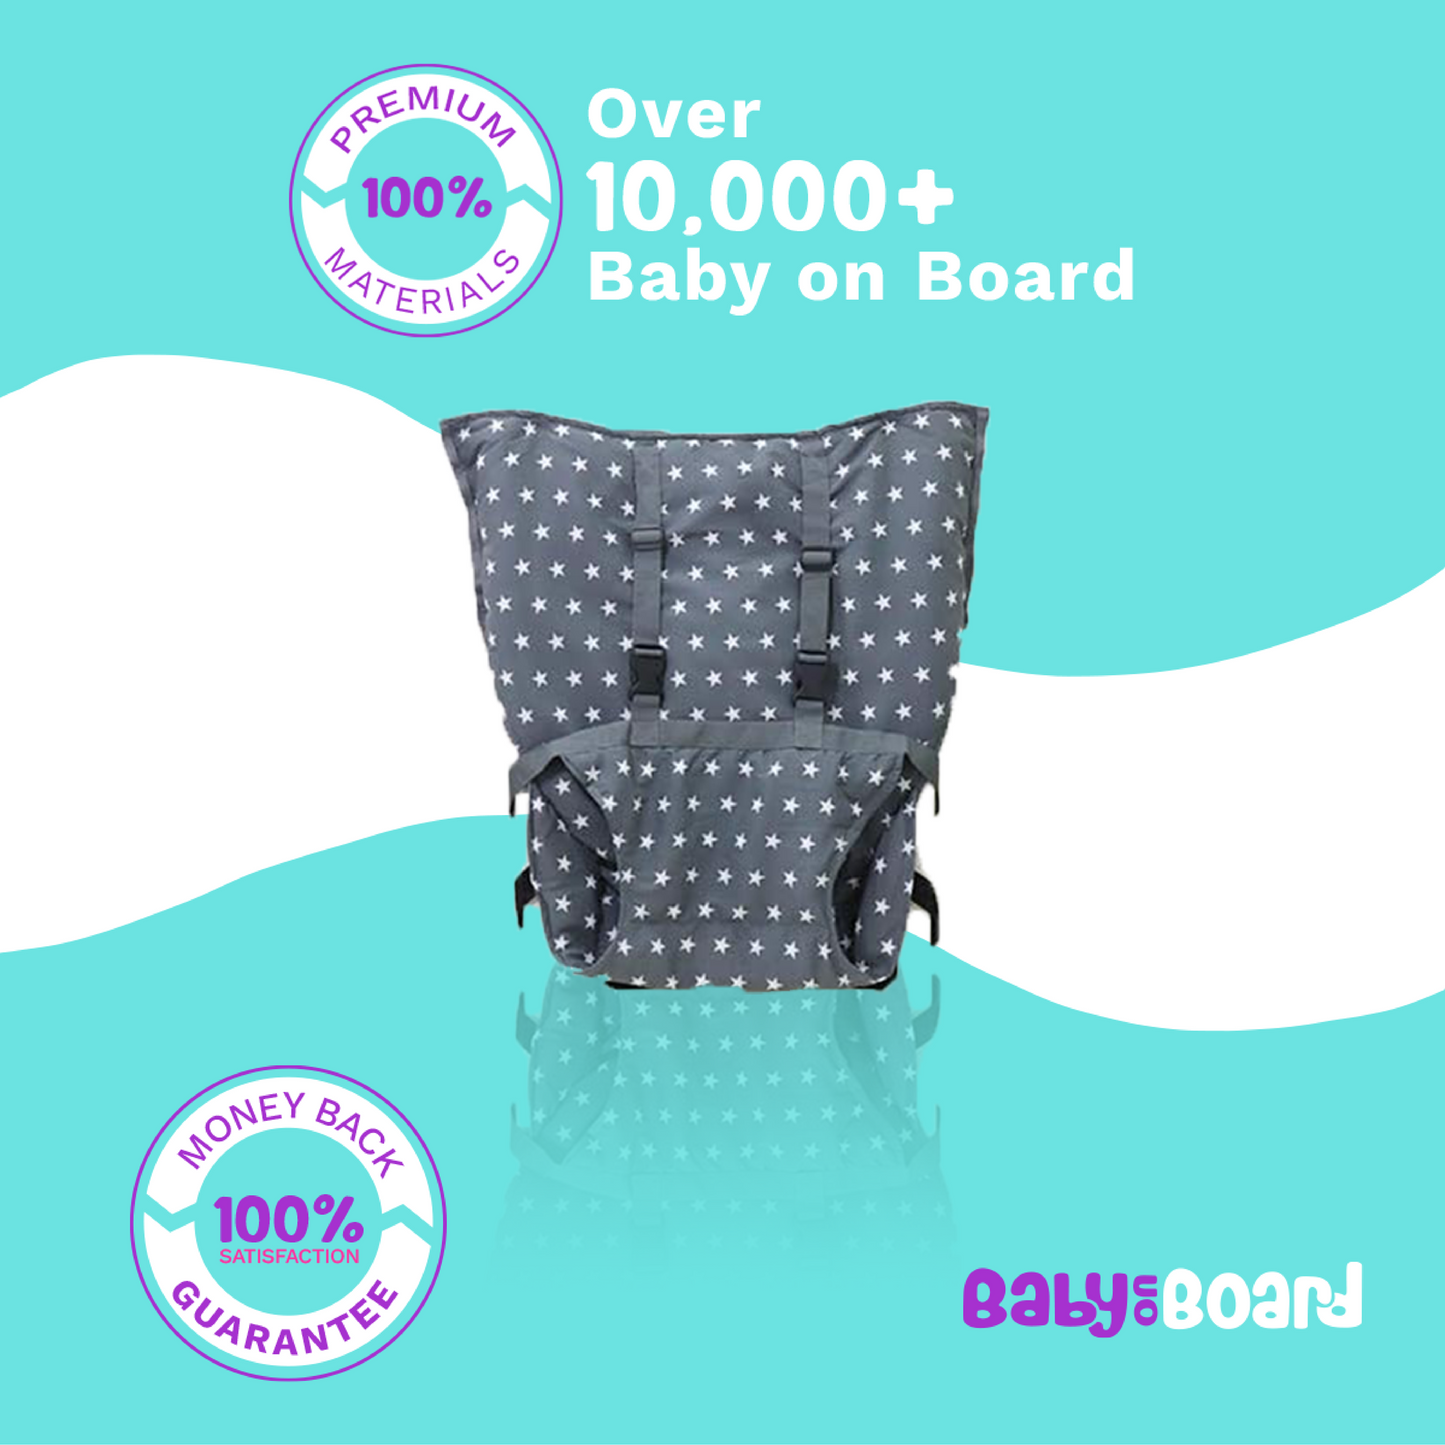 Baby on Board™